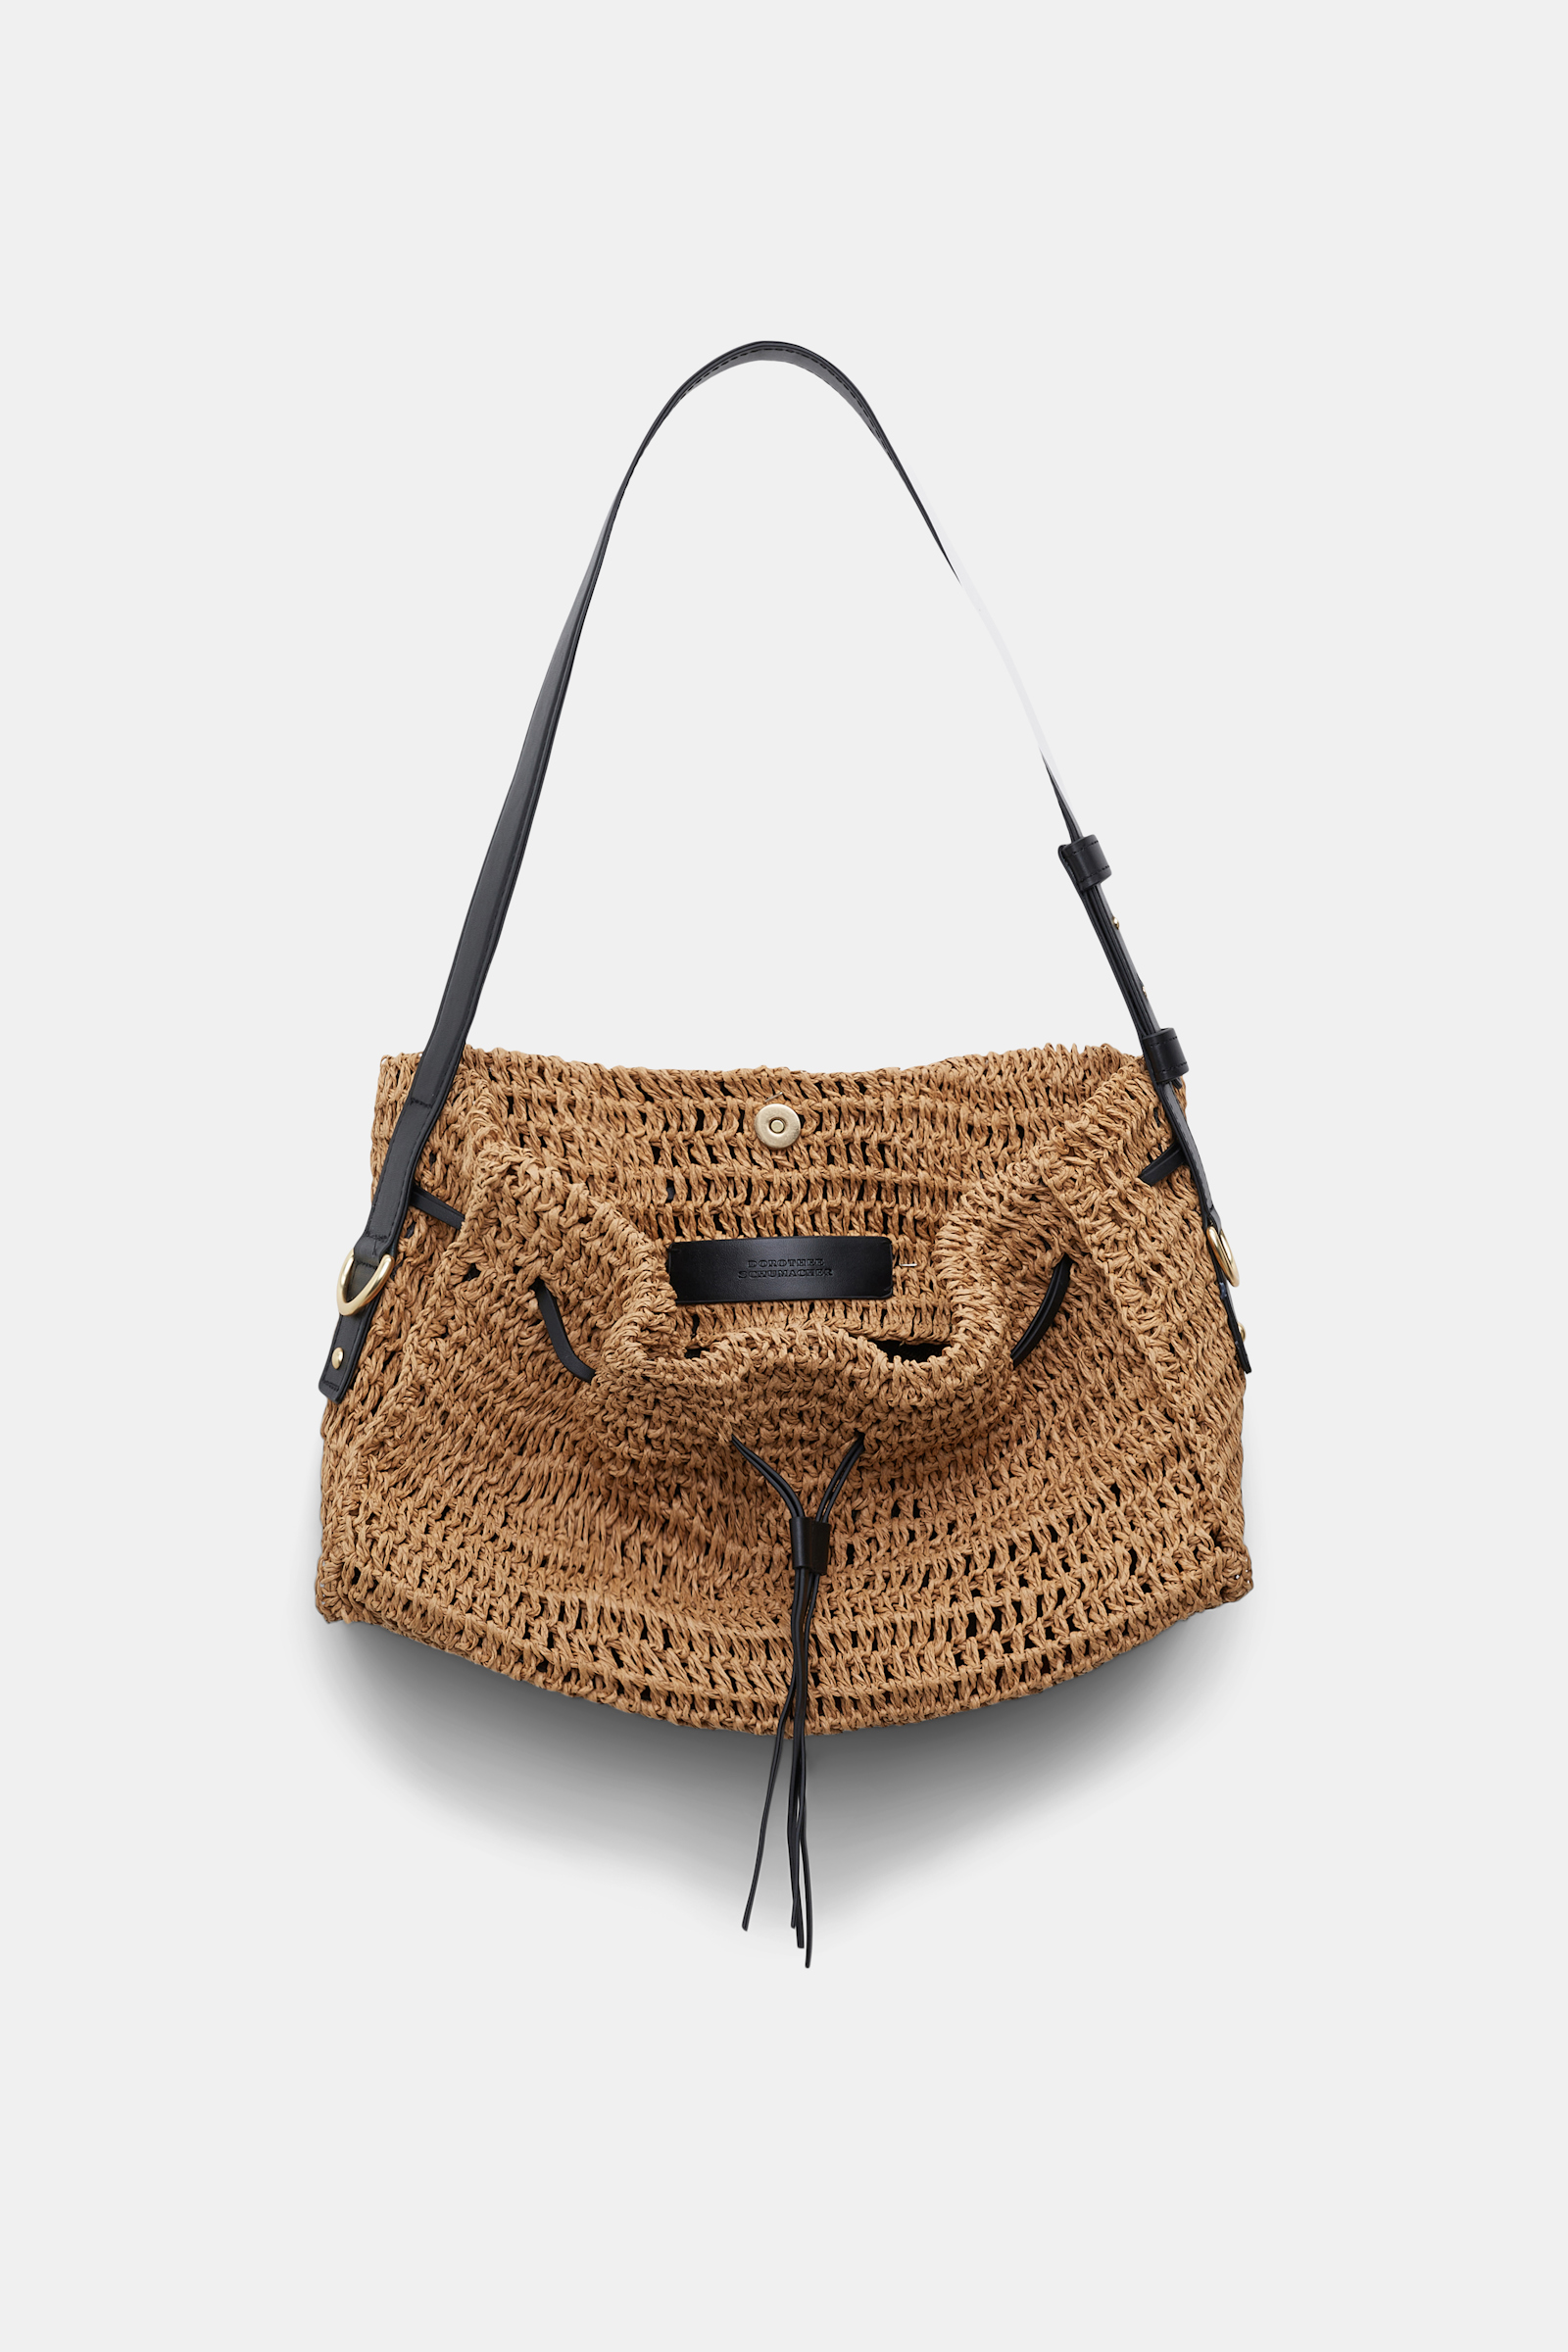 Dorothee Schumacher Petite woven raffia drawstring satchel with leather detailing rusty brown